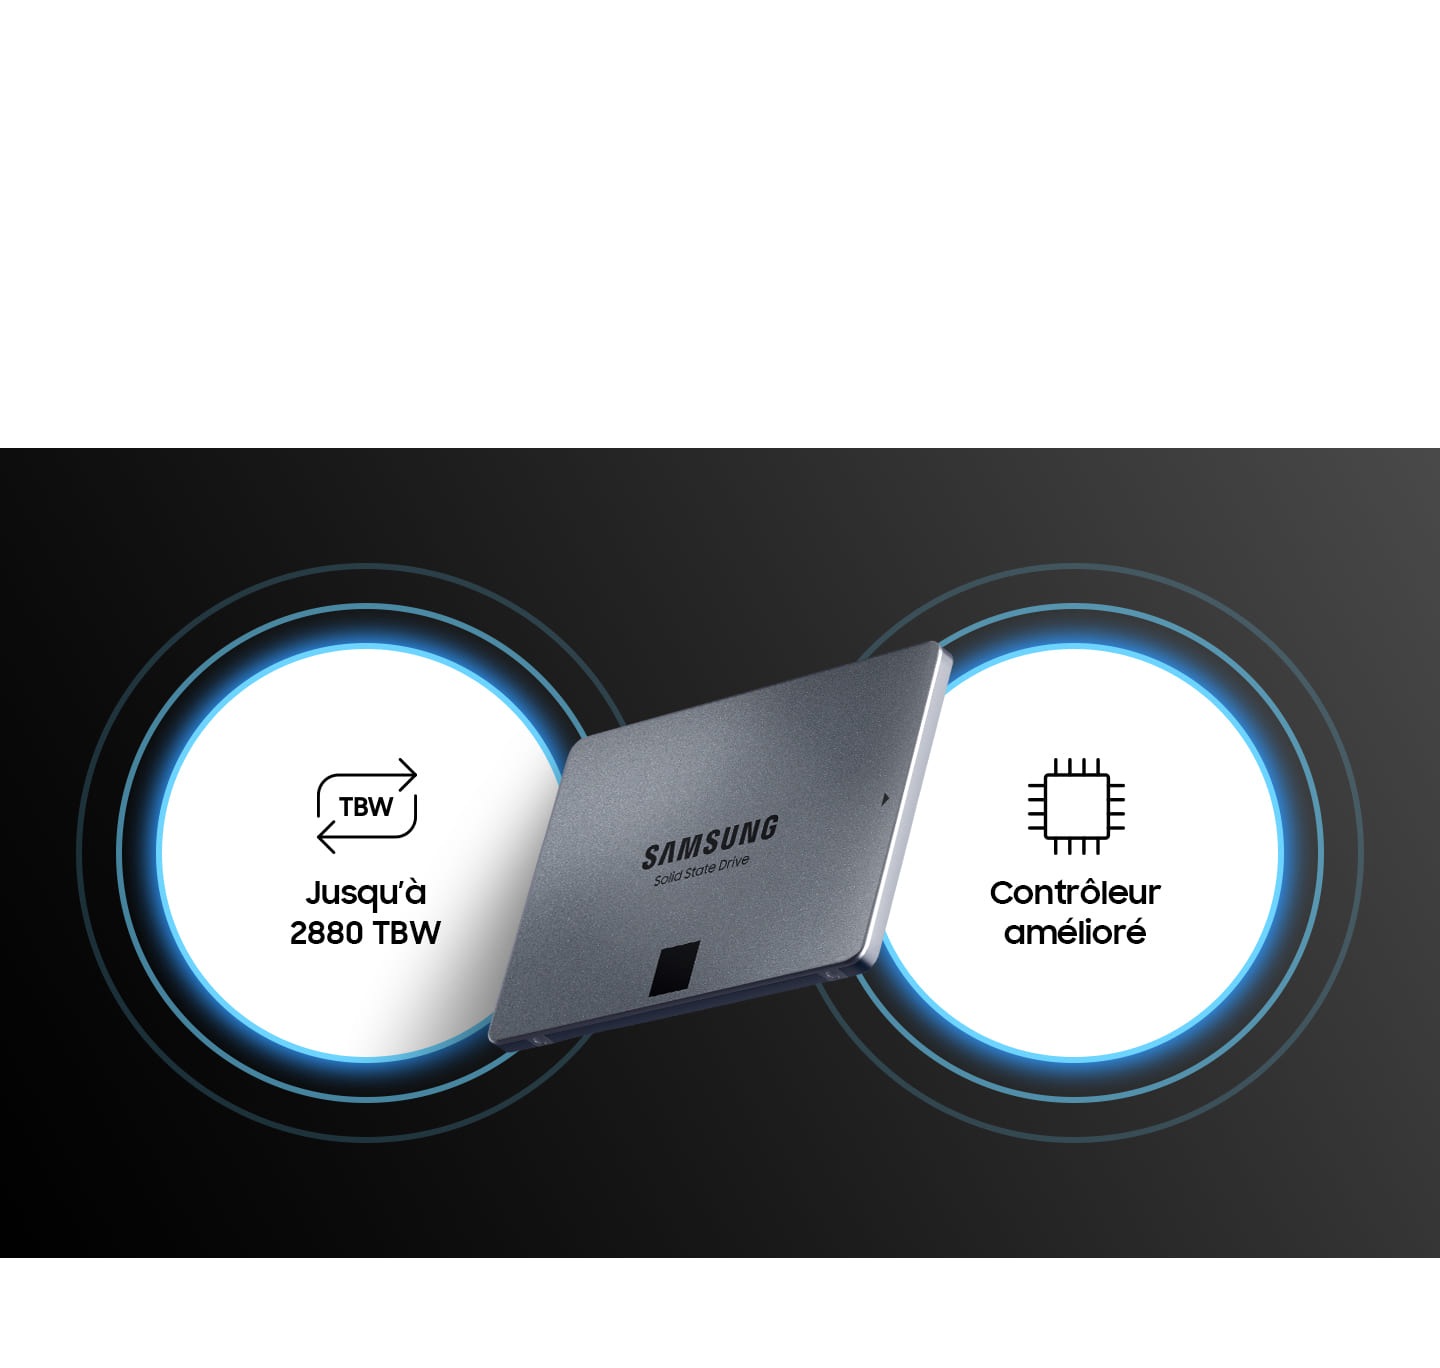 SAMSUNG 870 QVO SATA III SSD 4TB 2.5 Internal Solid State Drive, Upgrade  Desktop PC or Laptop Memory and Storage for IT Pros, Creators, Everyday